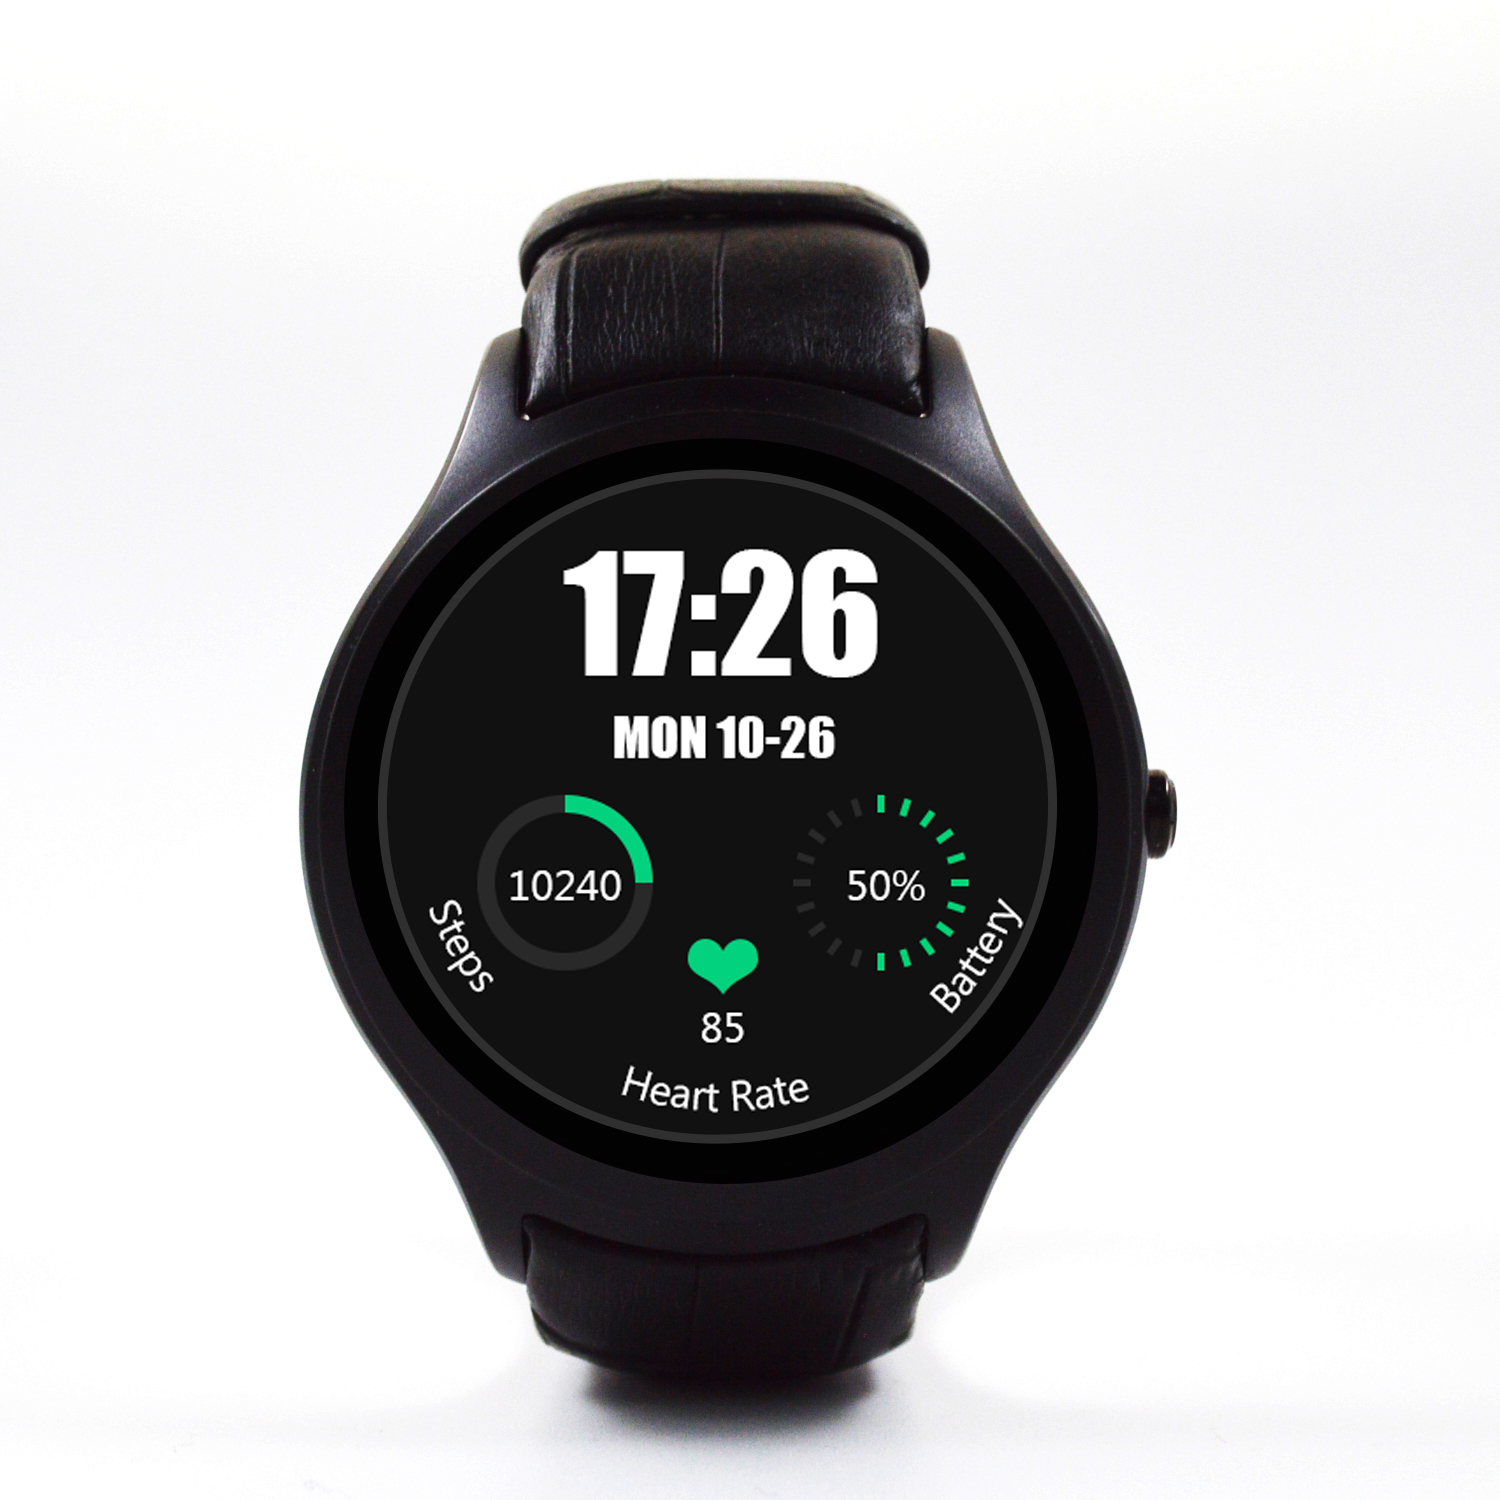 No.1 D5 Smartwatch - Full Smartwatch Specifications